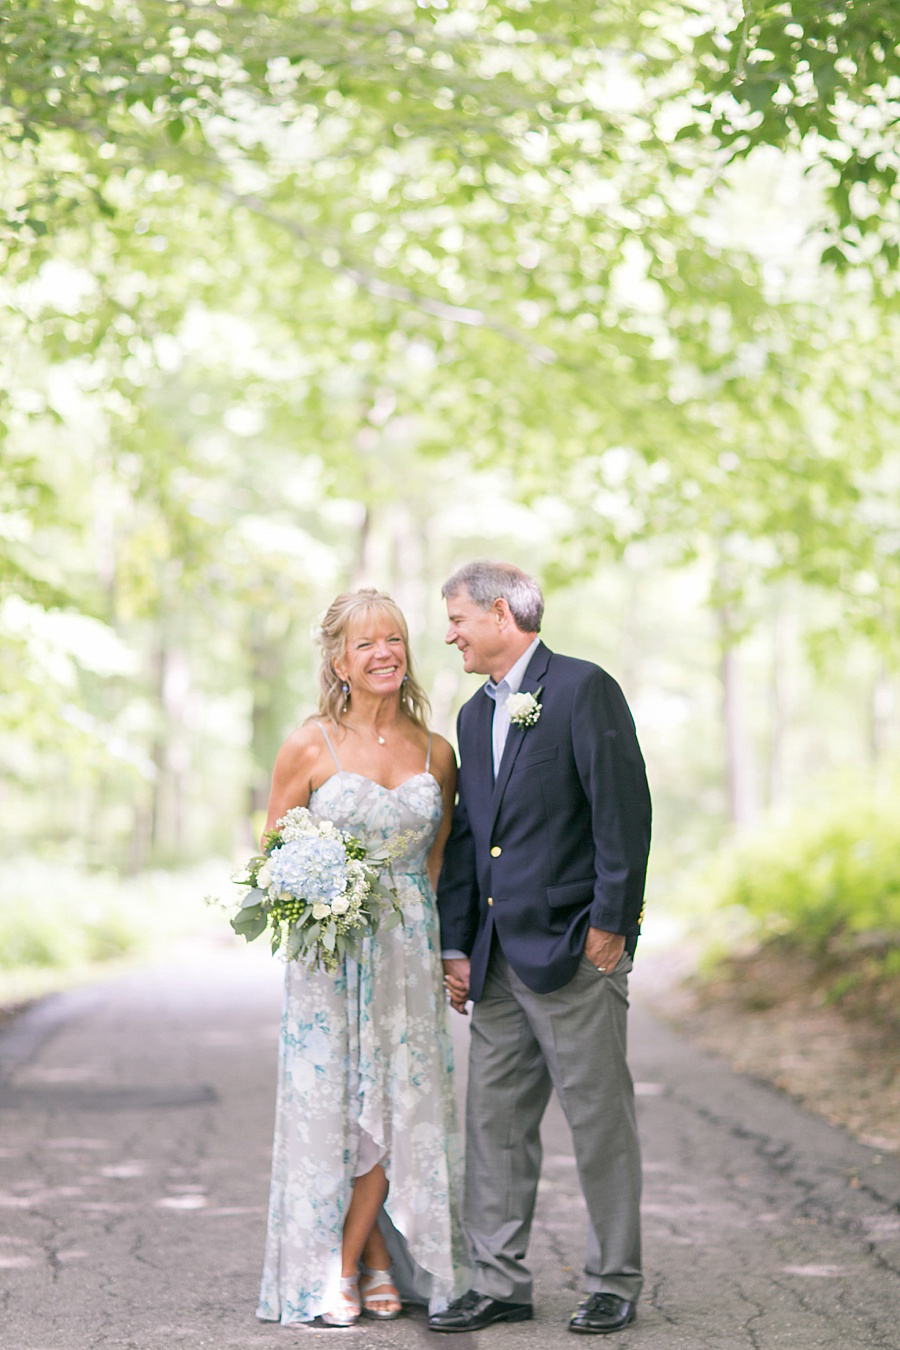 Private Estate Wedding Photographer- Amy Rizzuto Photography-31